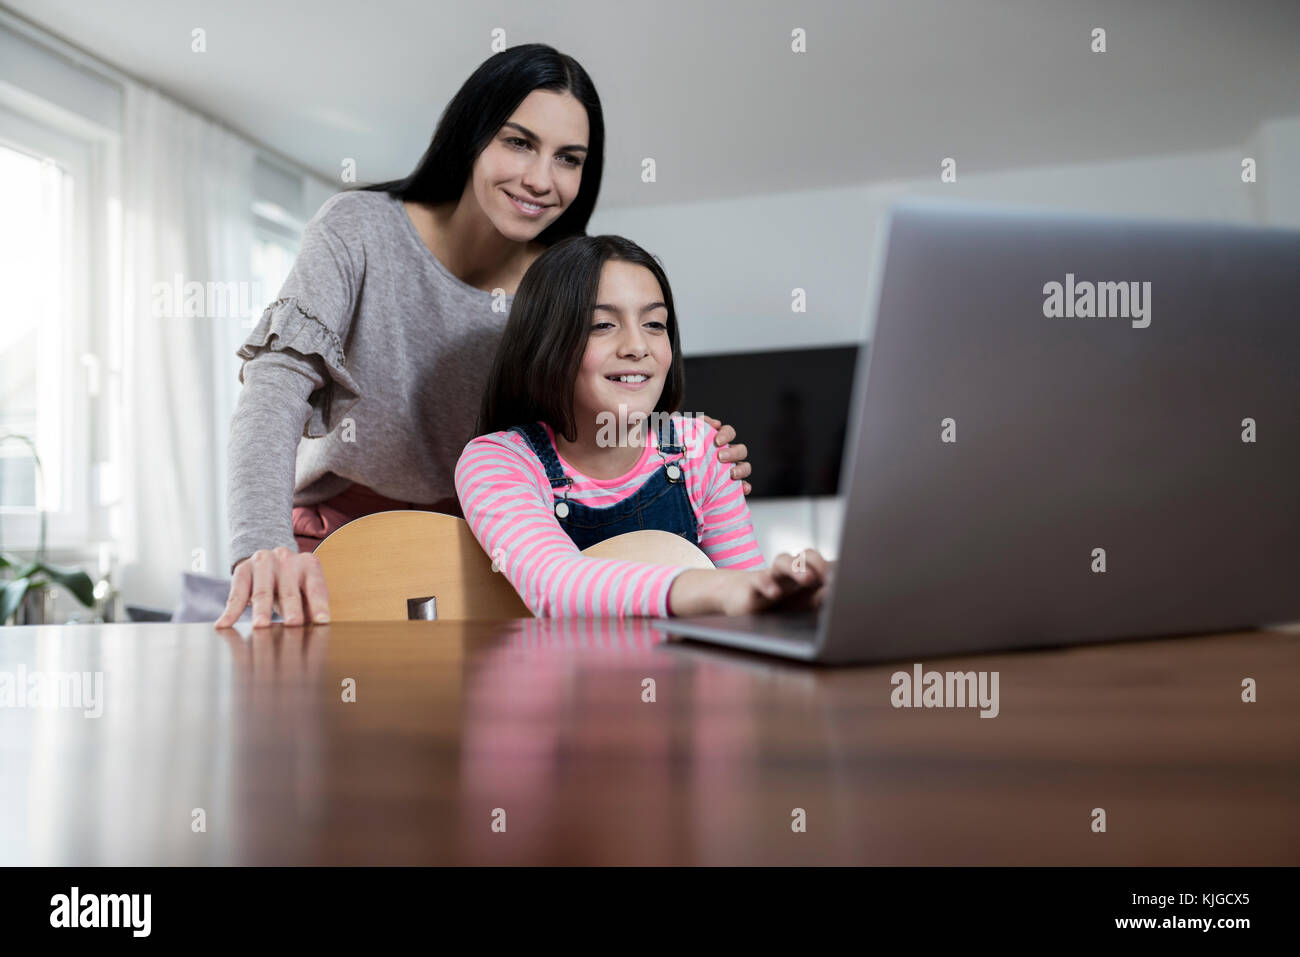 Mother and daughter smiling in front of laptop with daughter holding a guitar Stock Photo